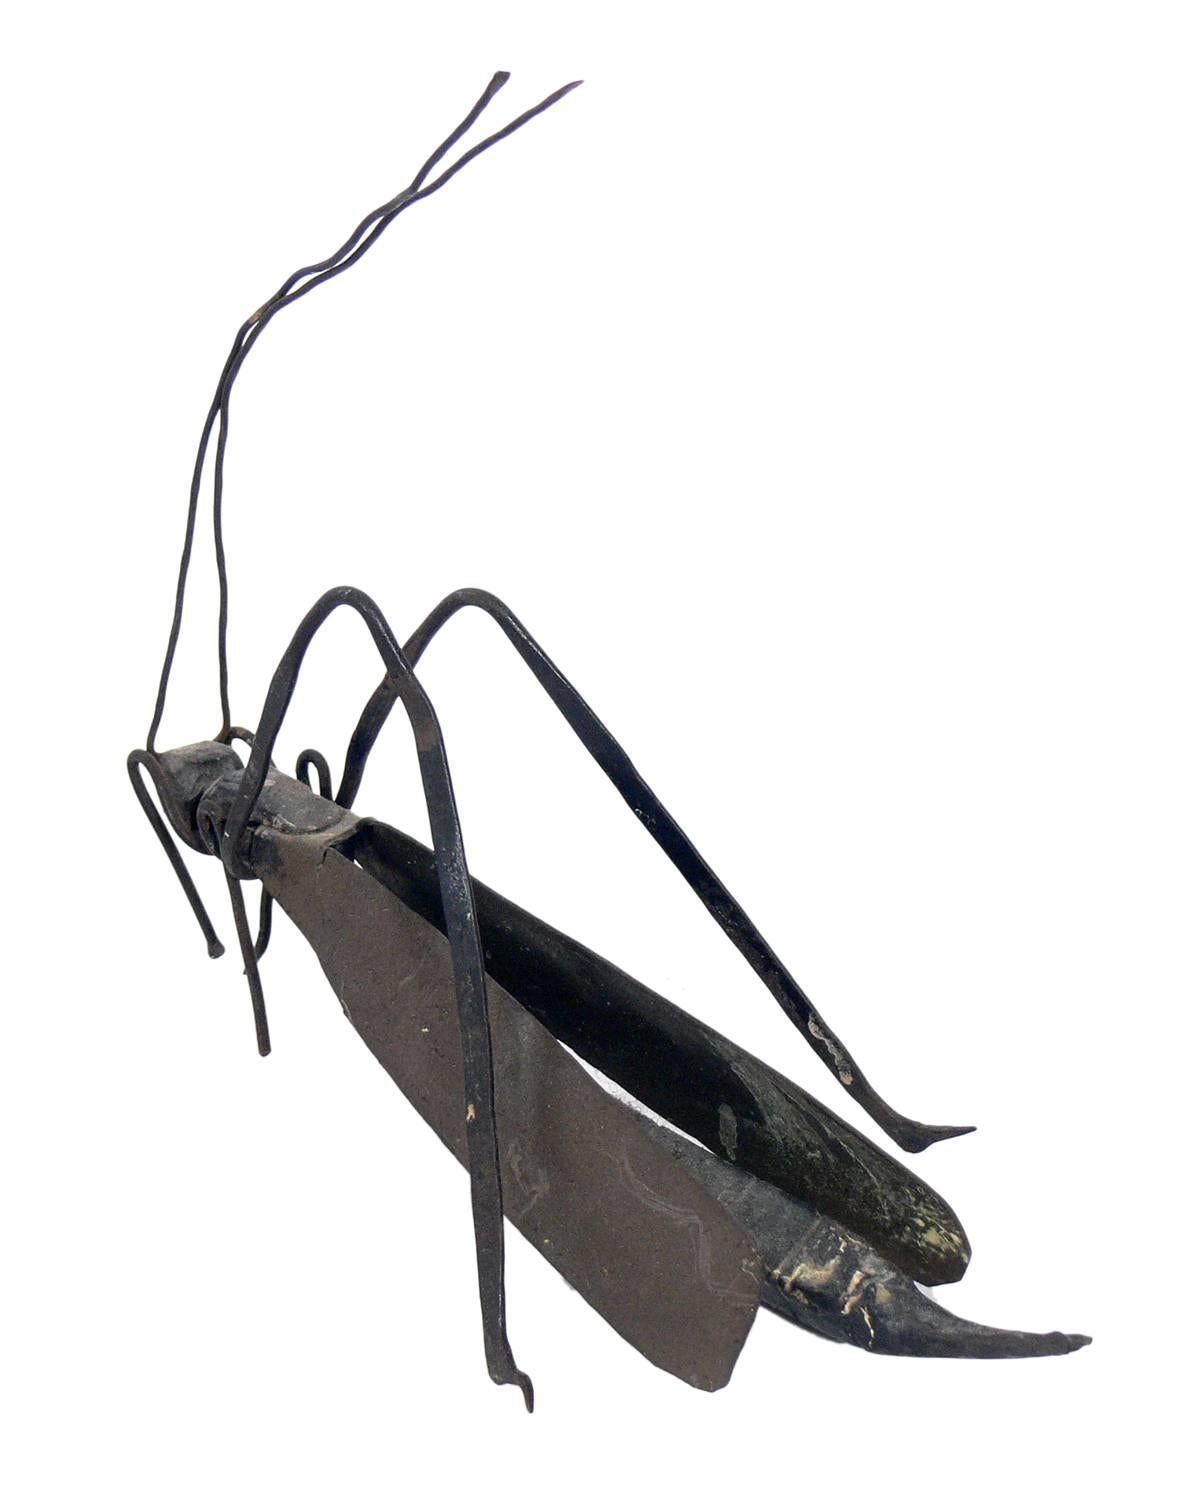 Chinese Export Group of Late 19th Century Japanese Iron and Brass Insects